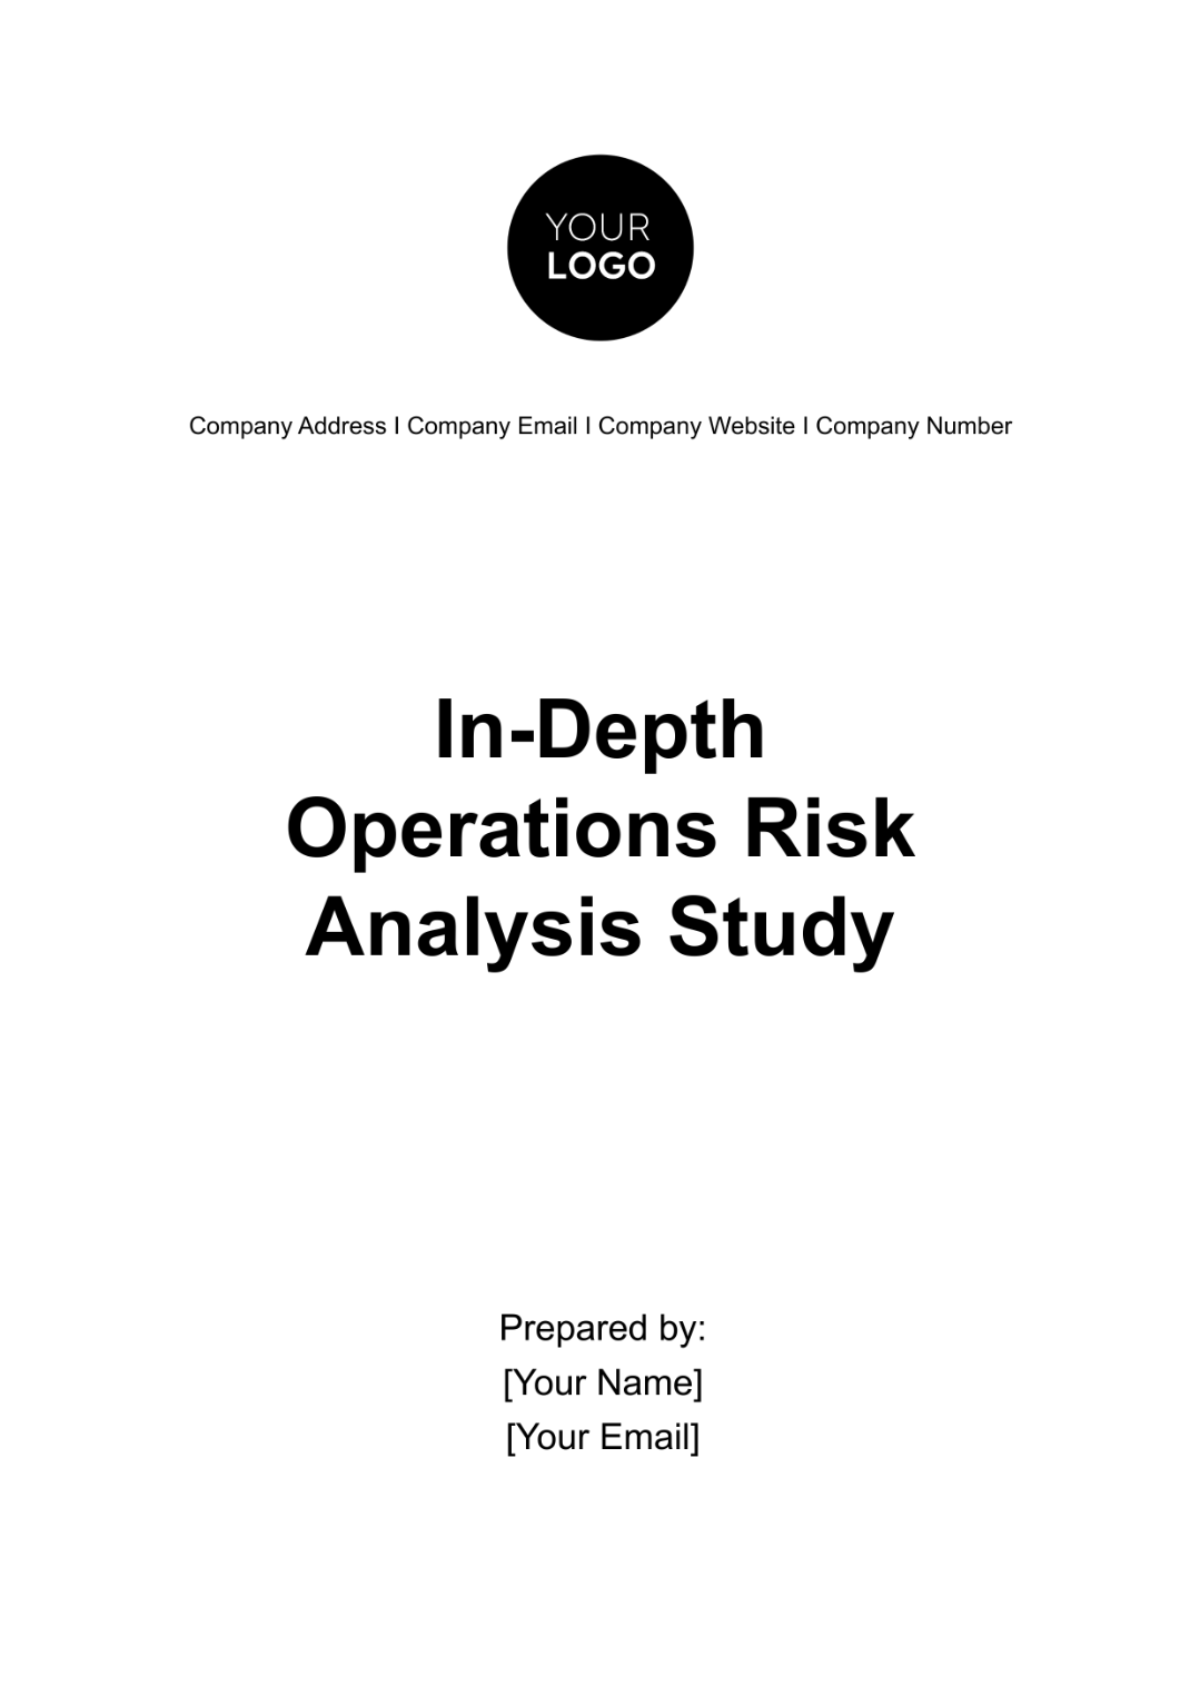 In-Depth Operations Risk Analysis Study Template